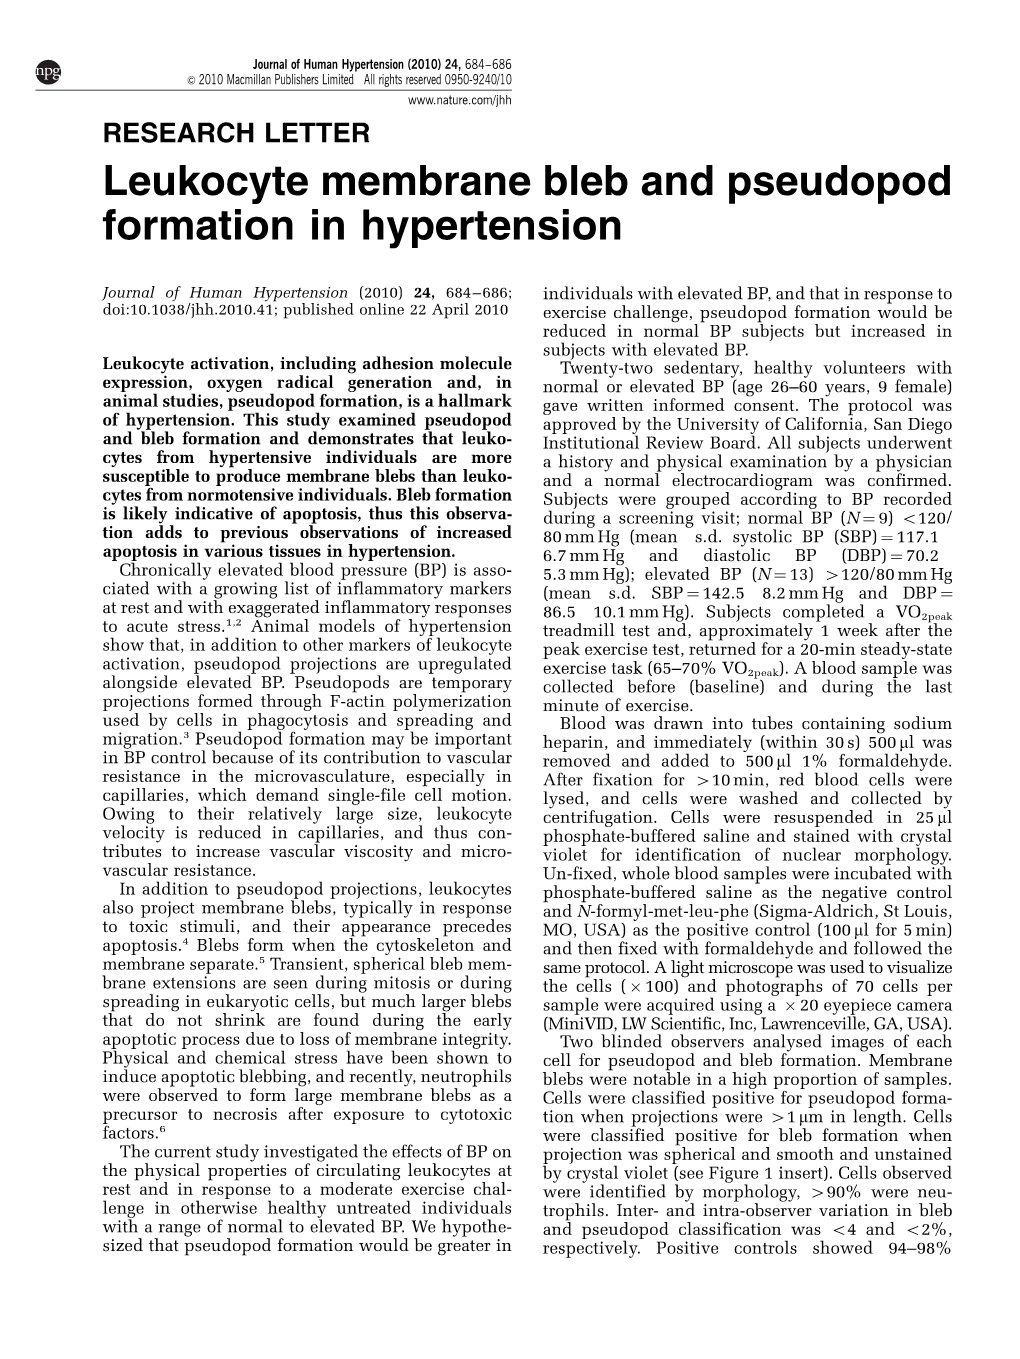 Leukocyte Membrane Bleb and Pseudopod Formation in Hypertension